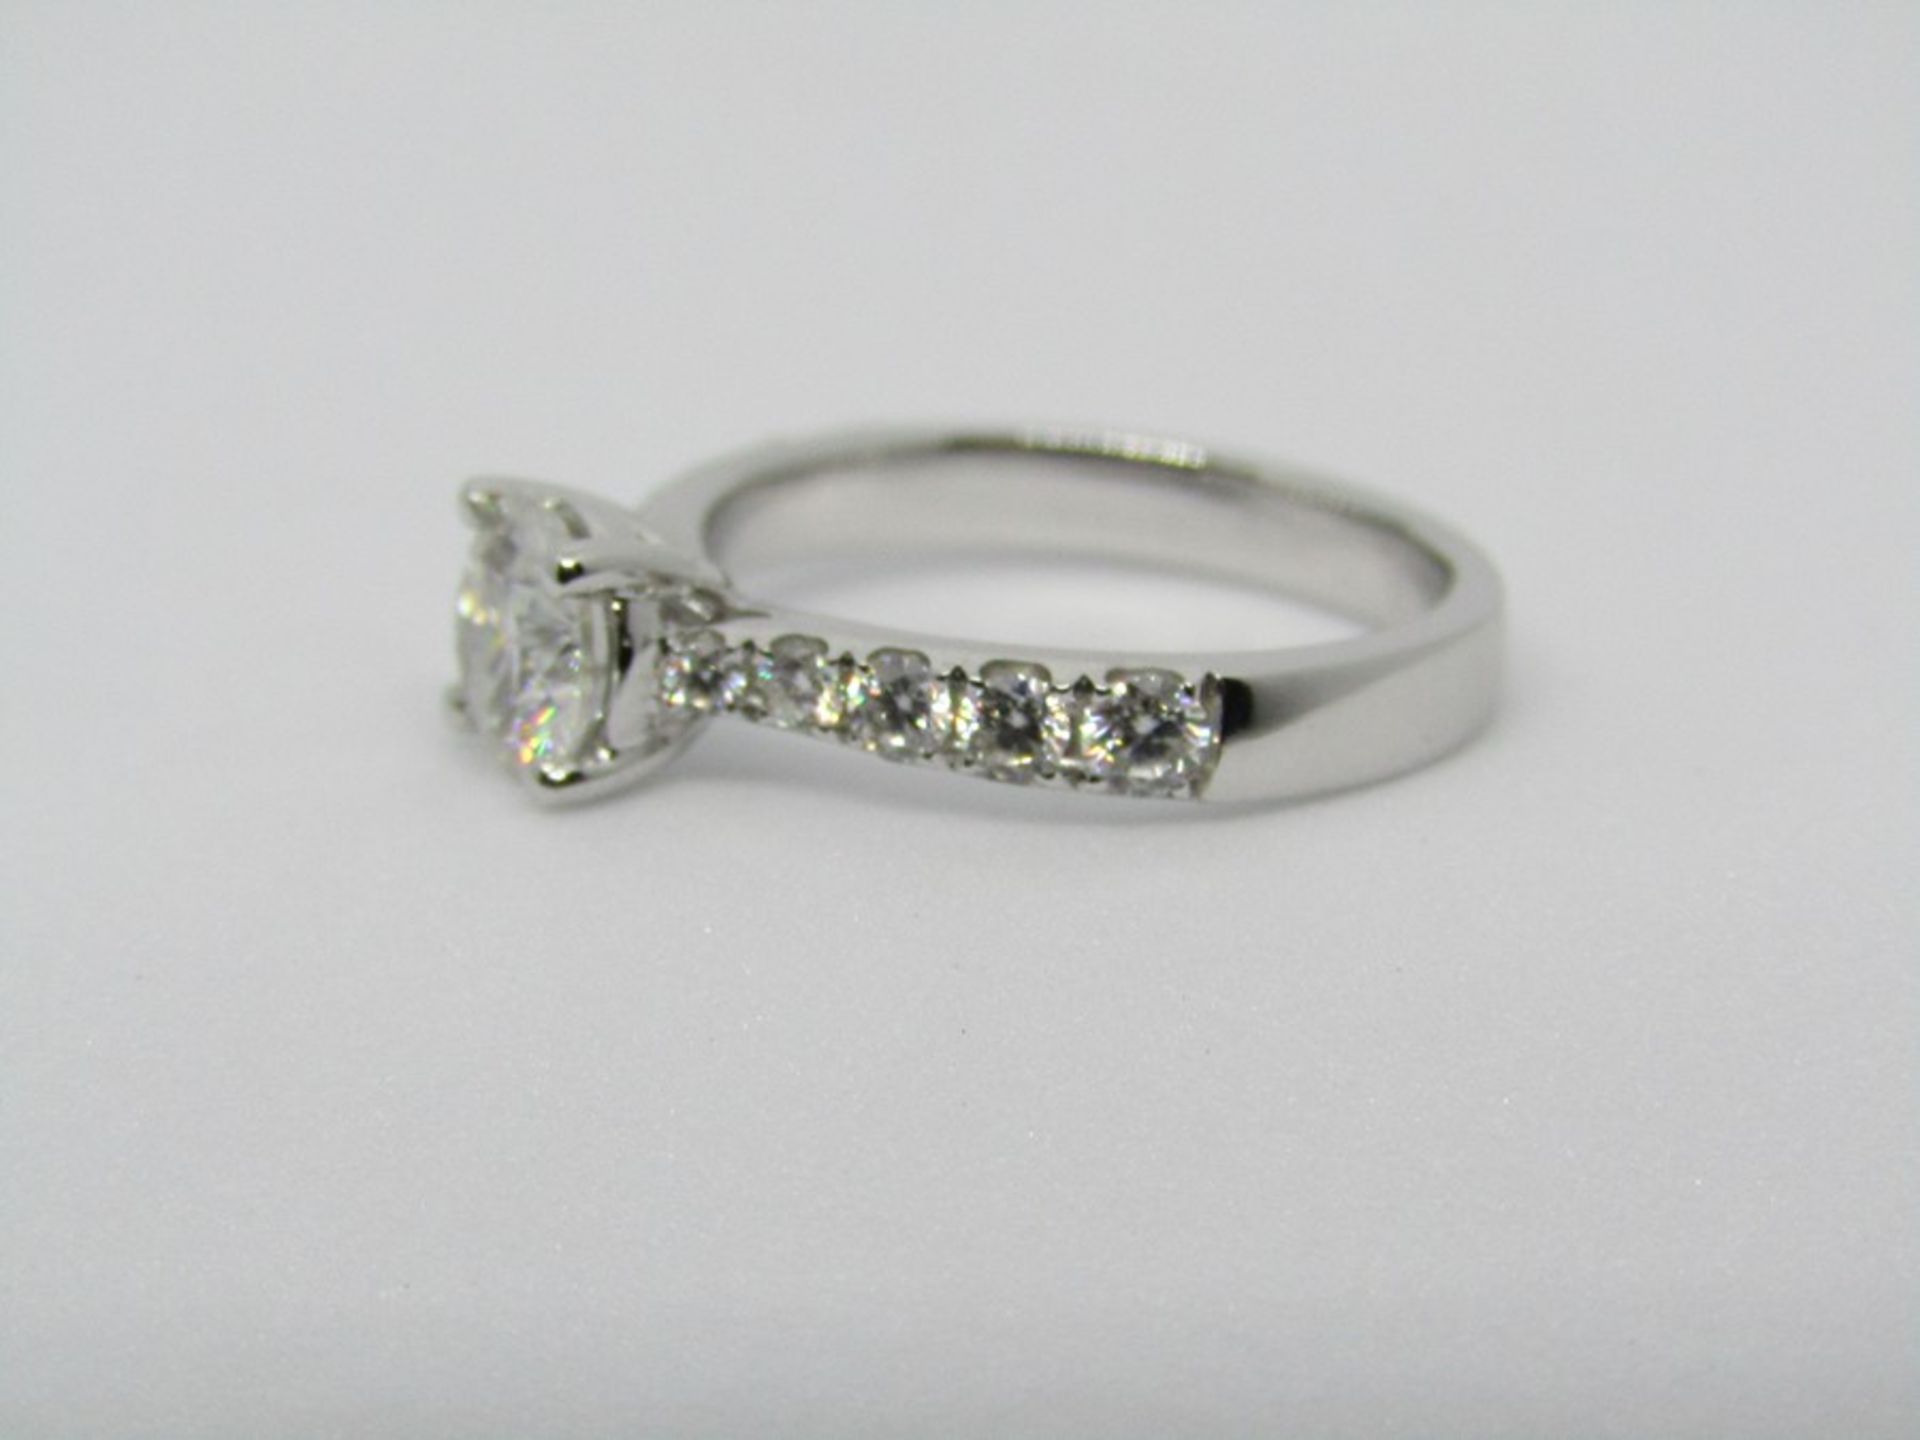 1ct Moissanite Ring set in 18ct White Gold, new. - Image 3 of 7